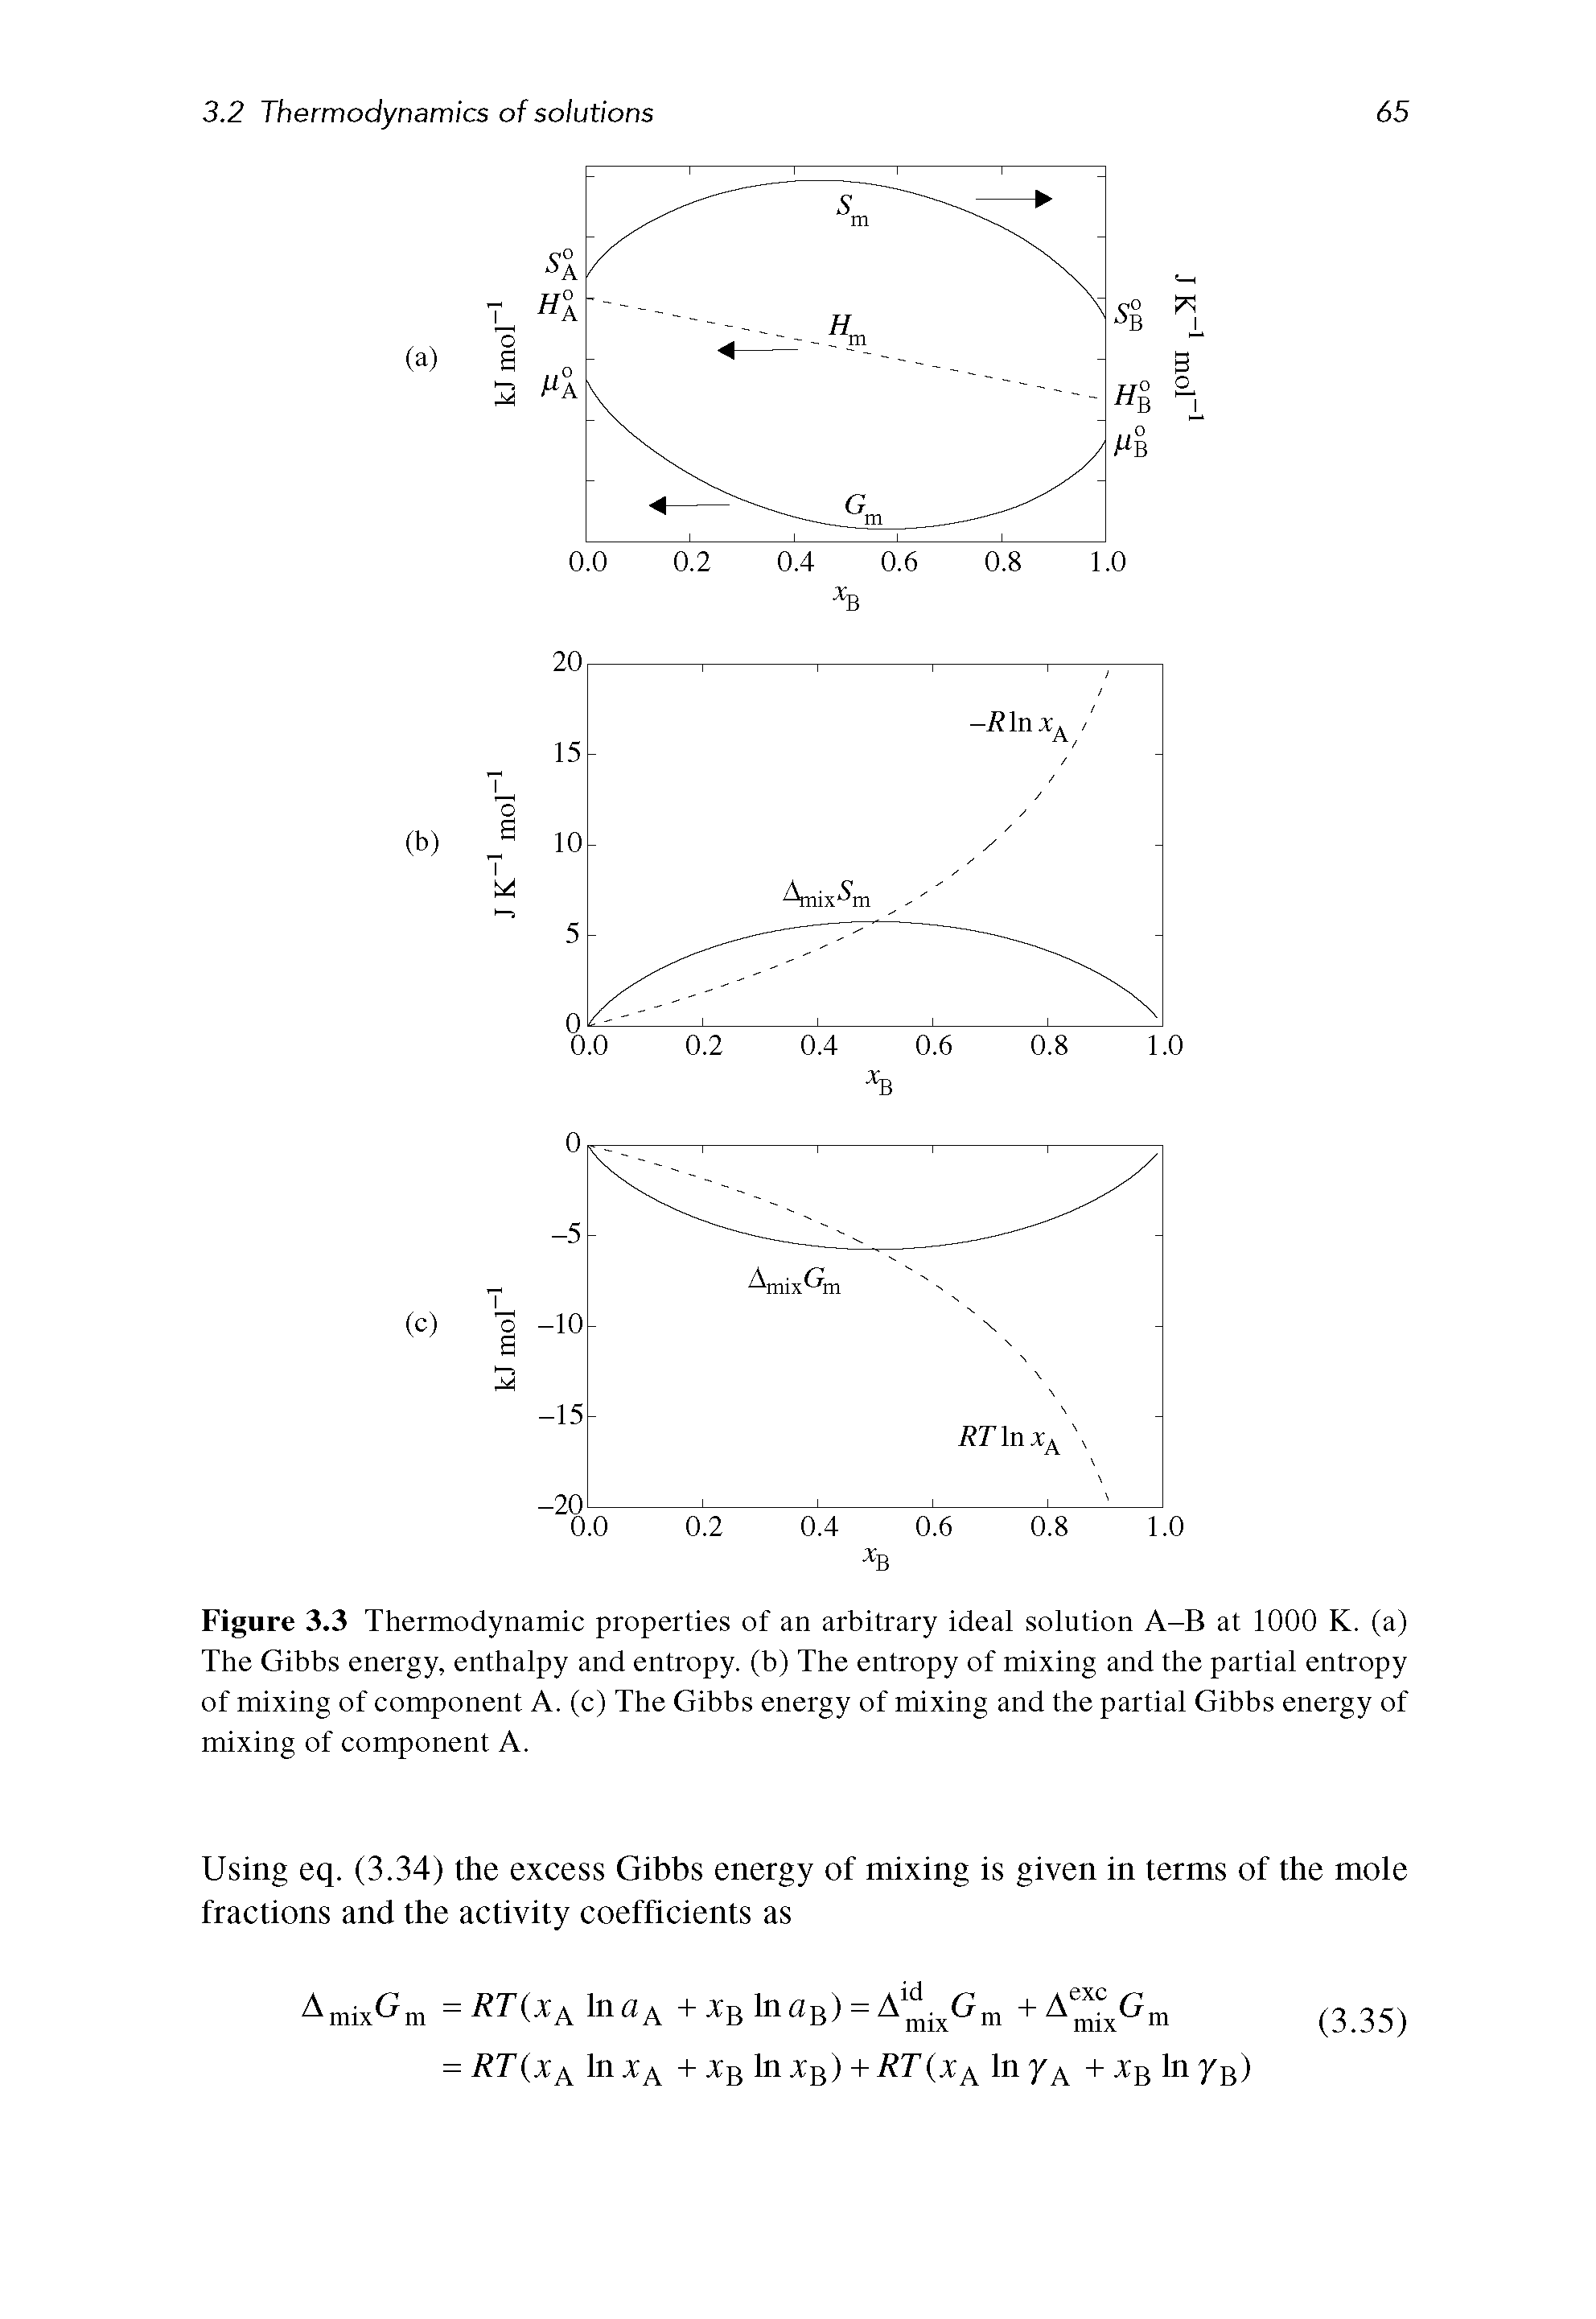 Figure 3.3 Thermodynamic properties of an arbitrary ideal solution A-B at 1000 K. (a) The Gibbs energy, enthalpy and entropy, (b) The entropy of mixing and the partial entropy of mixing of component A. (c) The Gibbs energy of mixing and the partial Gibbs energy of mixing of component A.